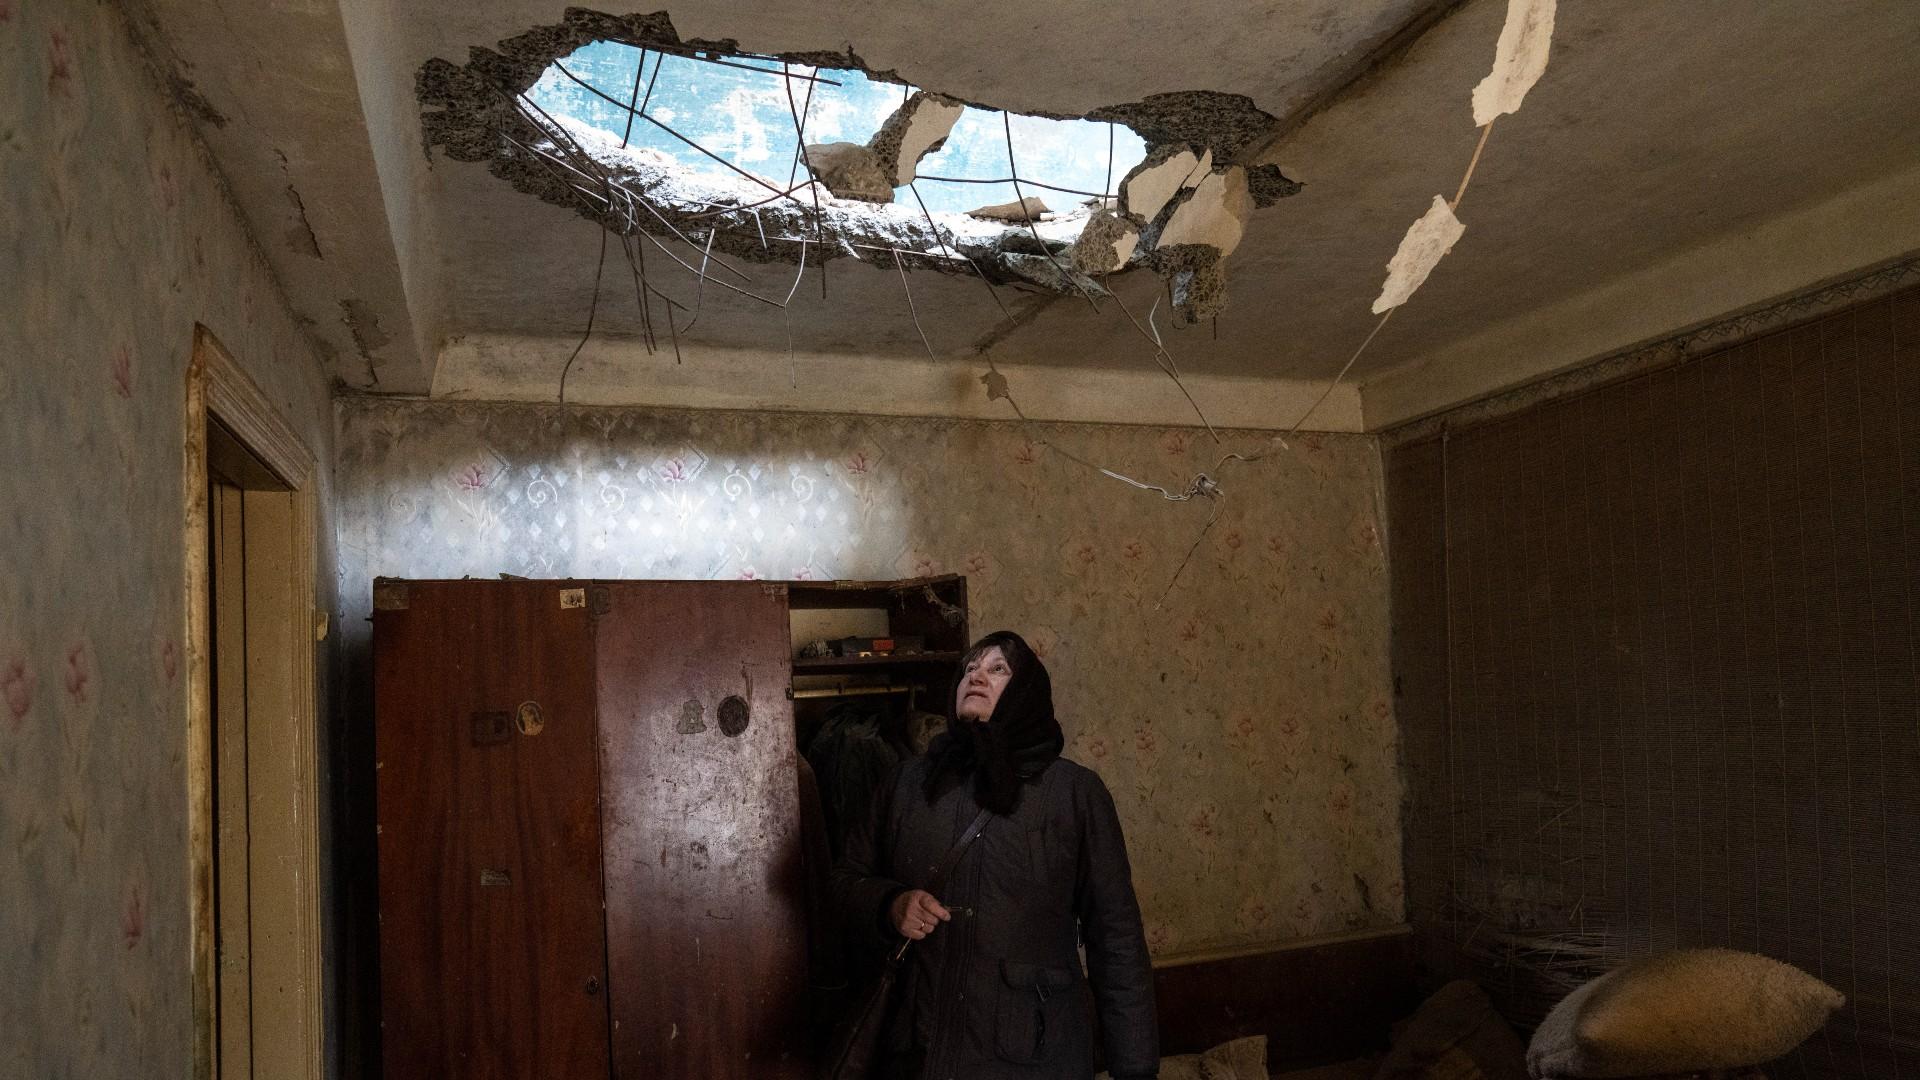 Halyna Falko looks at the destruction caused after a Russian attack inside her house near Brovary, on the outskirts of Kyiv, Ukraine, Monday, March 28, 2022. (AP Photo / Rodrigo Abd)